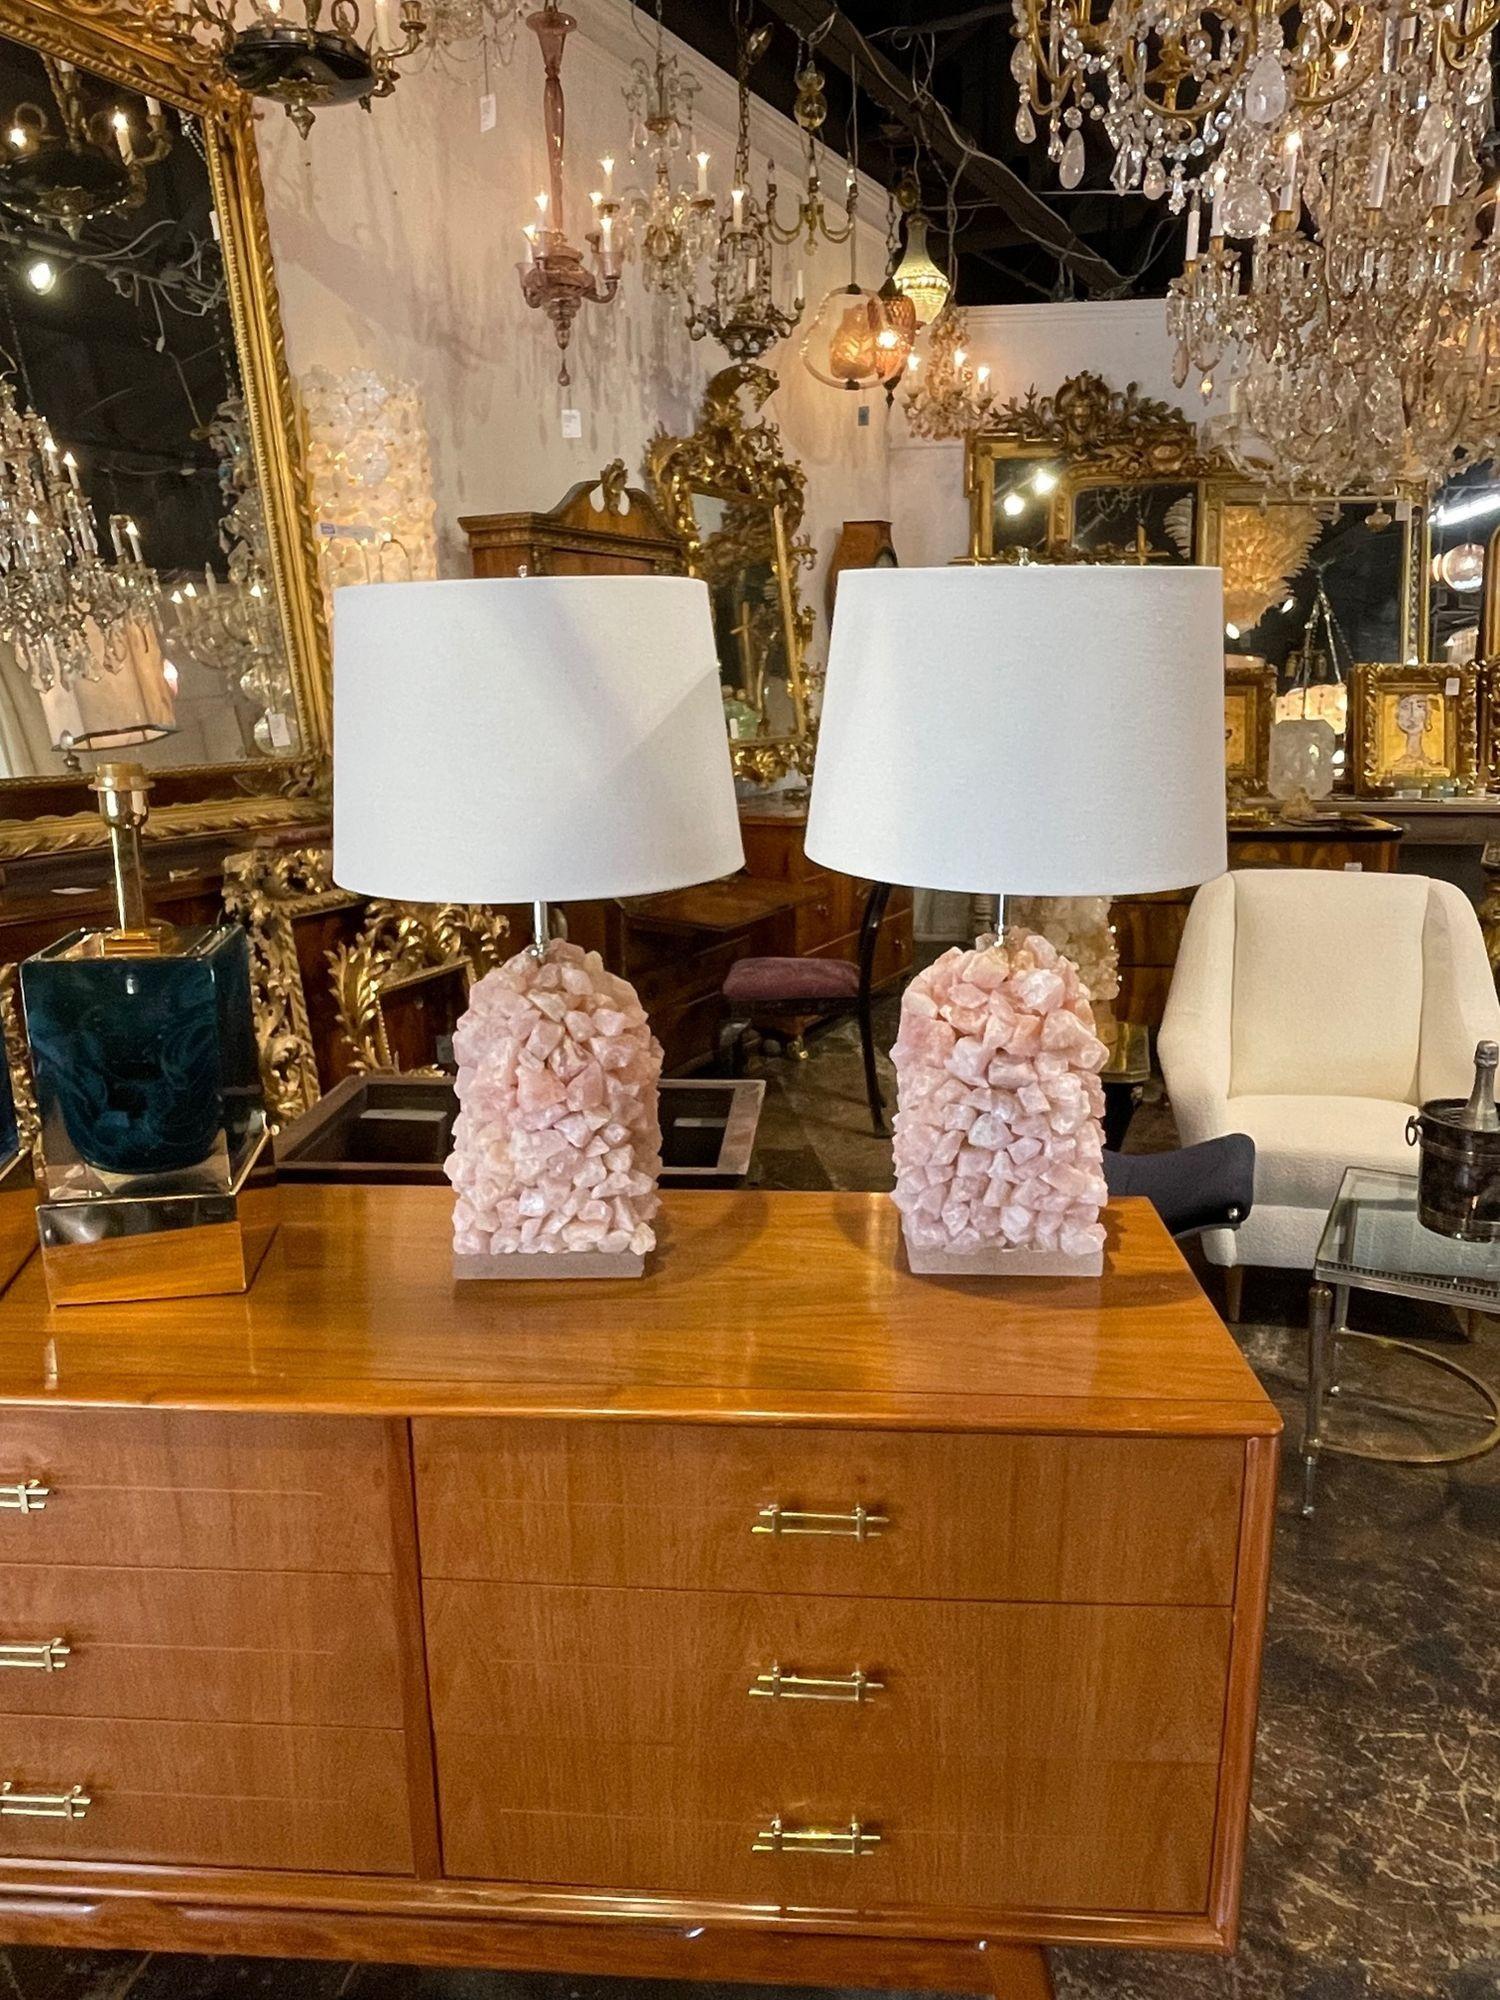 Interesting pair of vintage pink quartz sculptural lamps. These are very fine quality and create an upscale look!.